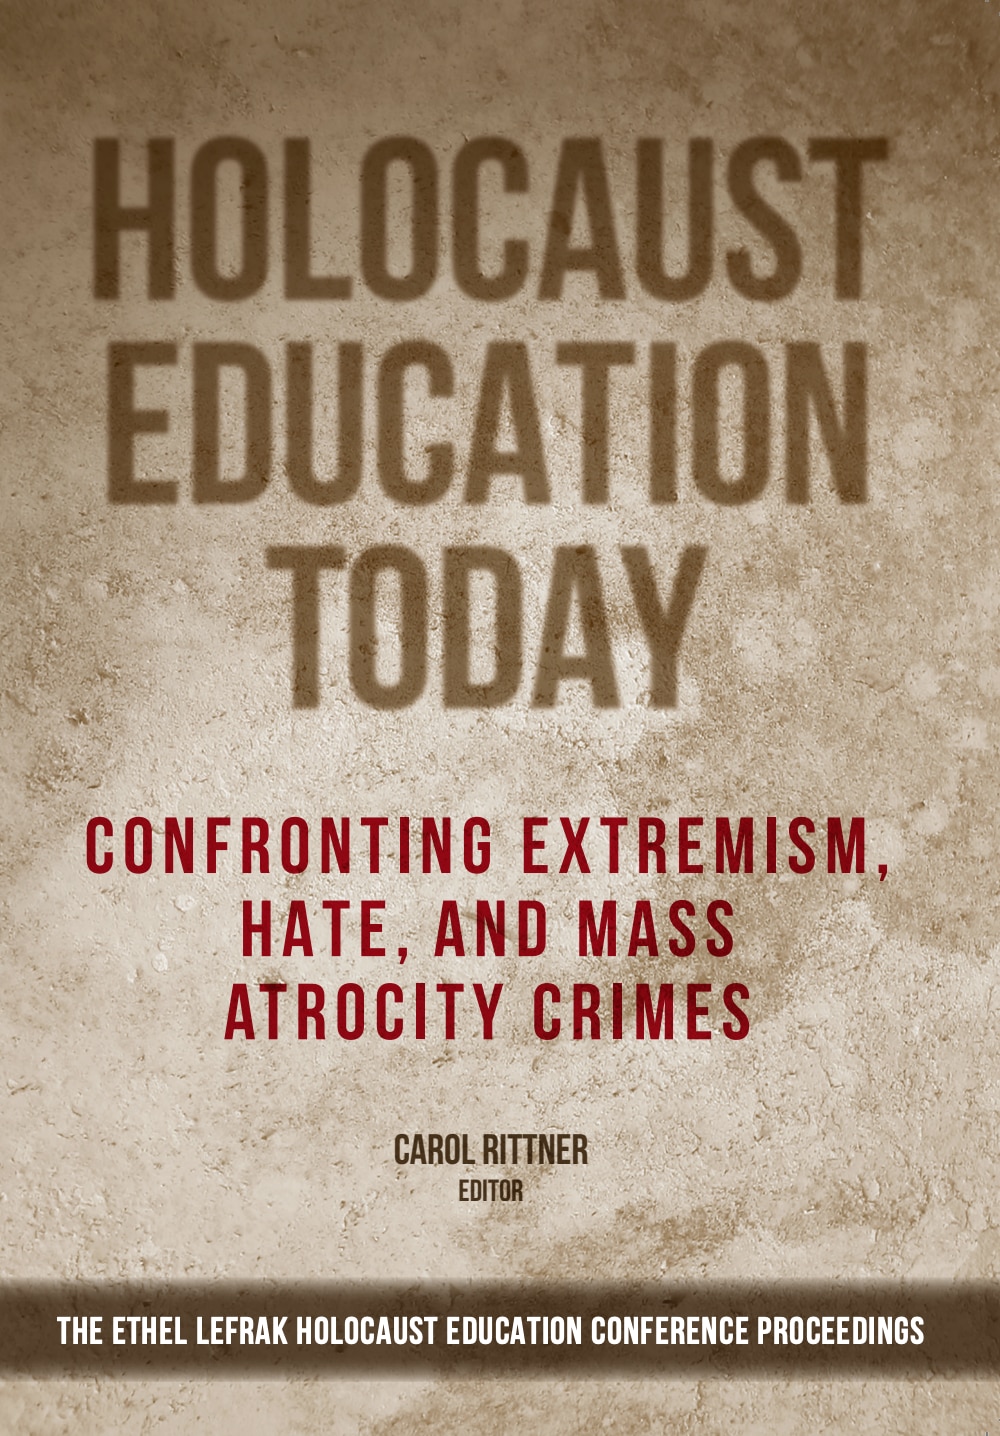 Holocaust Education Today: Confronting Extremism, Hate and Mass Atrocity C